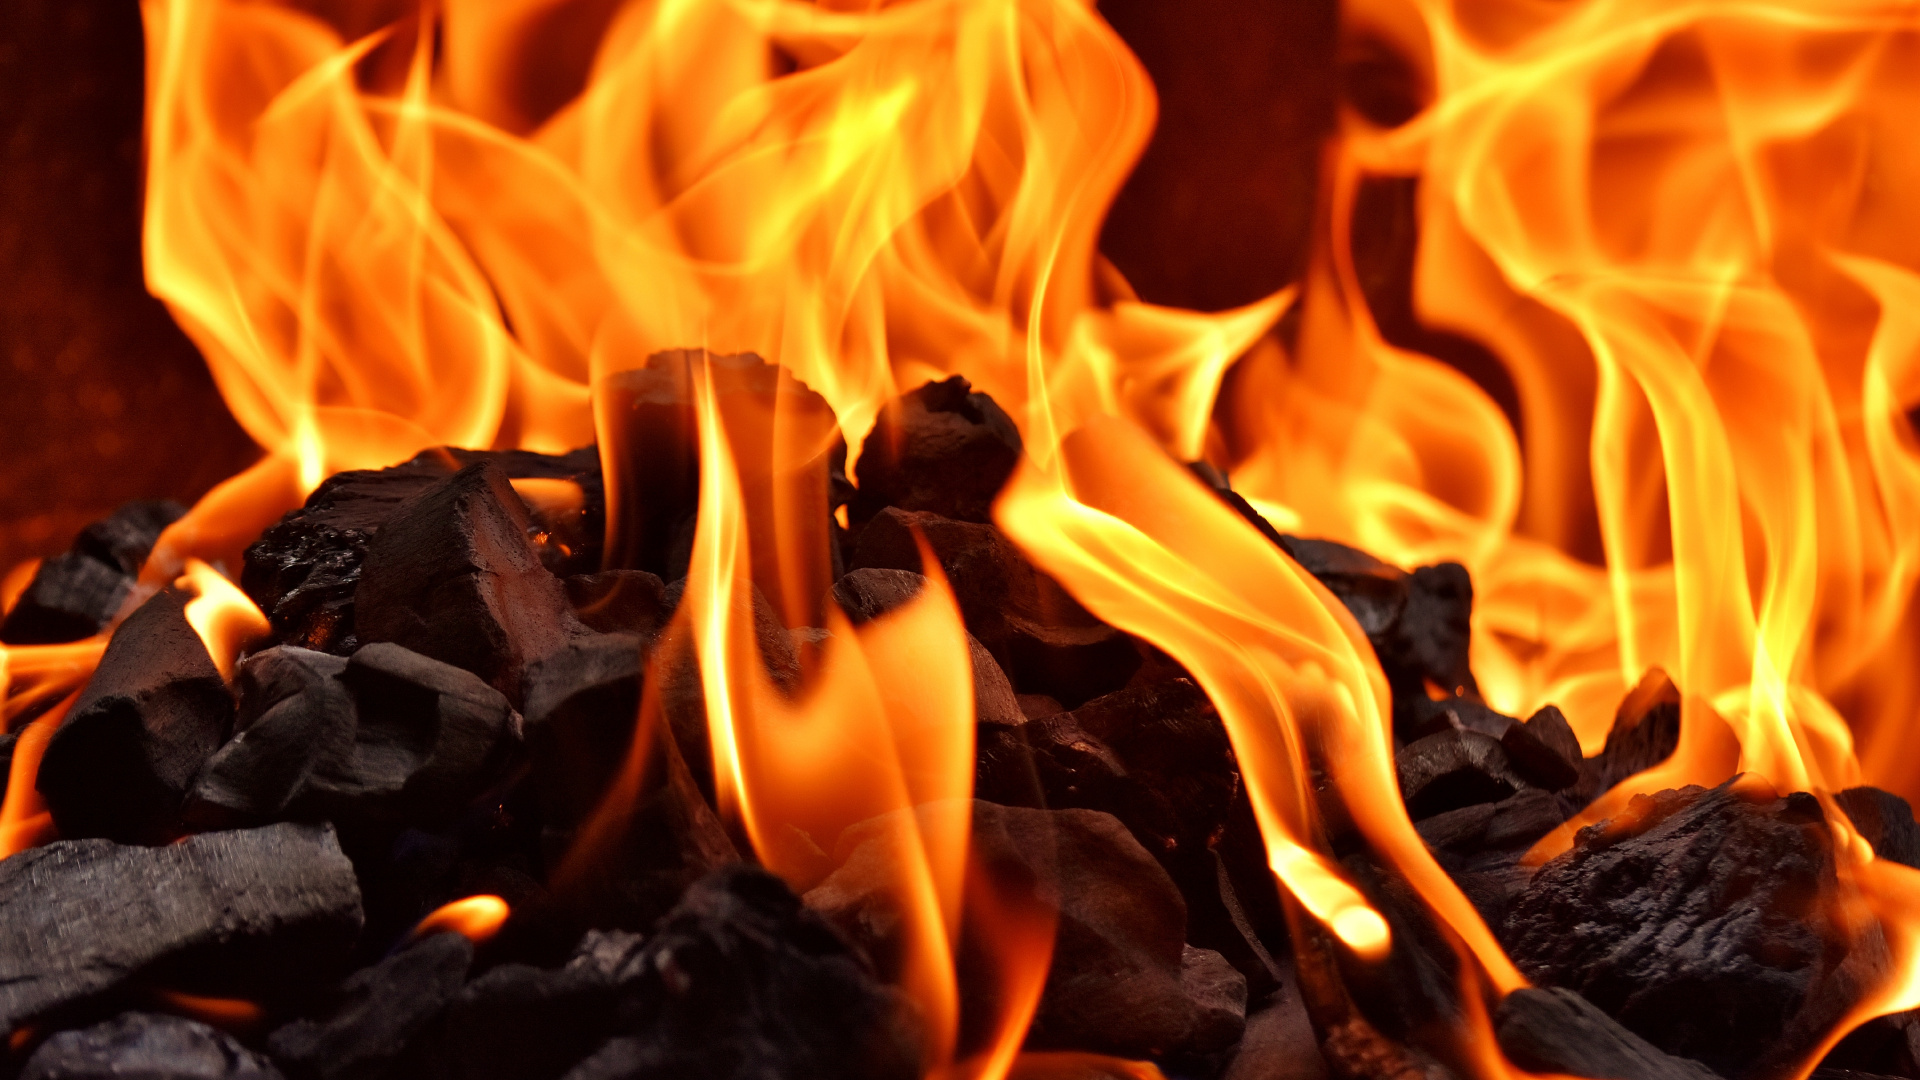 Burning Fire on Black Textile. Wallpaper in 1920x1080 Resolution